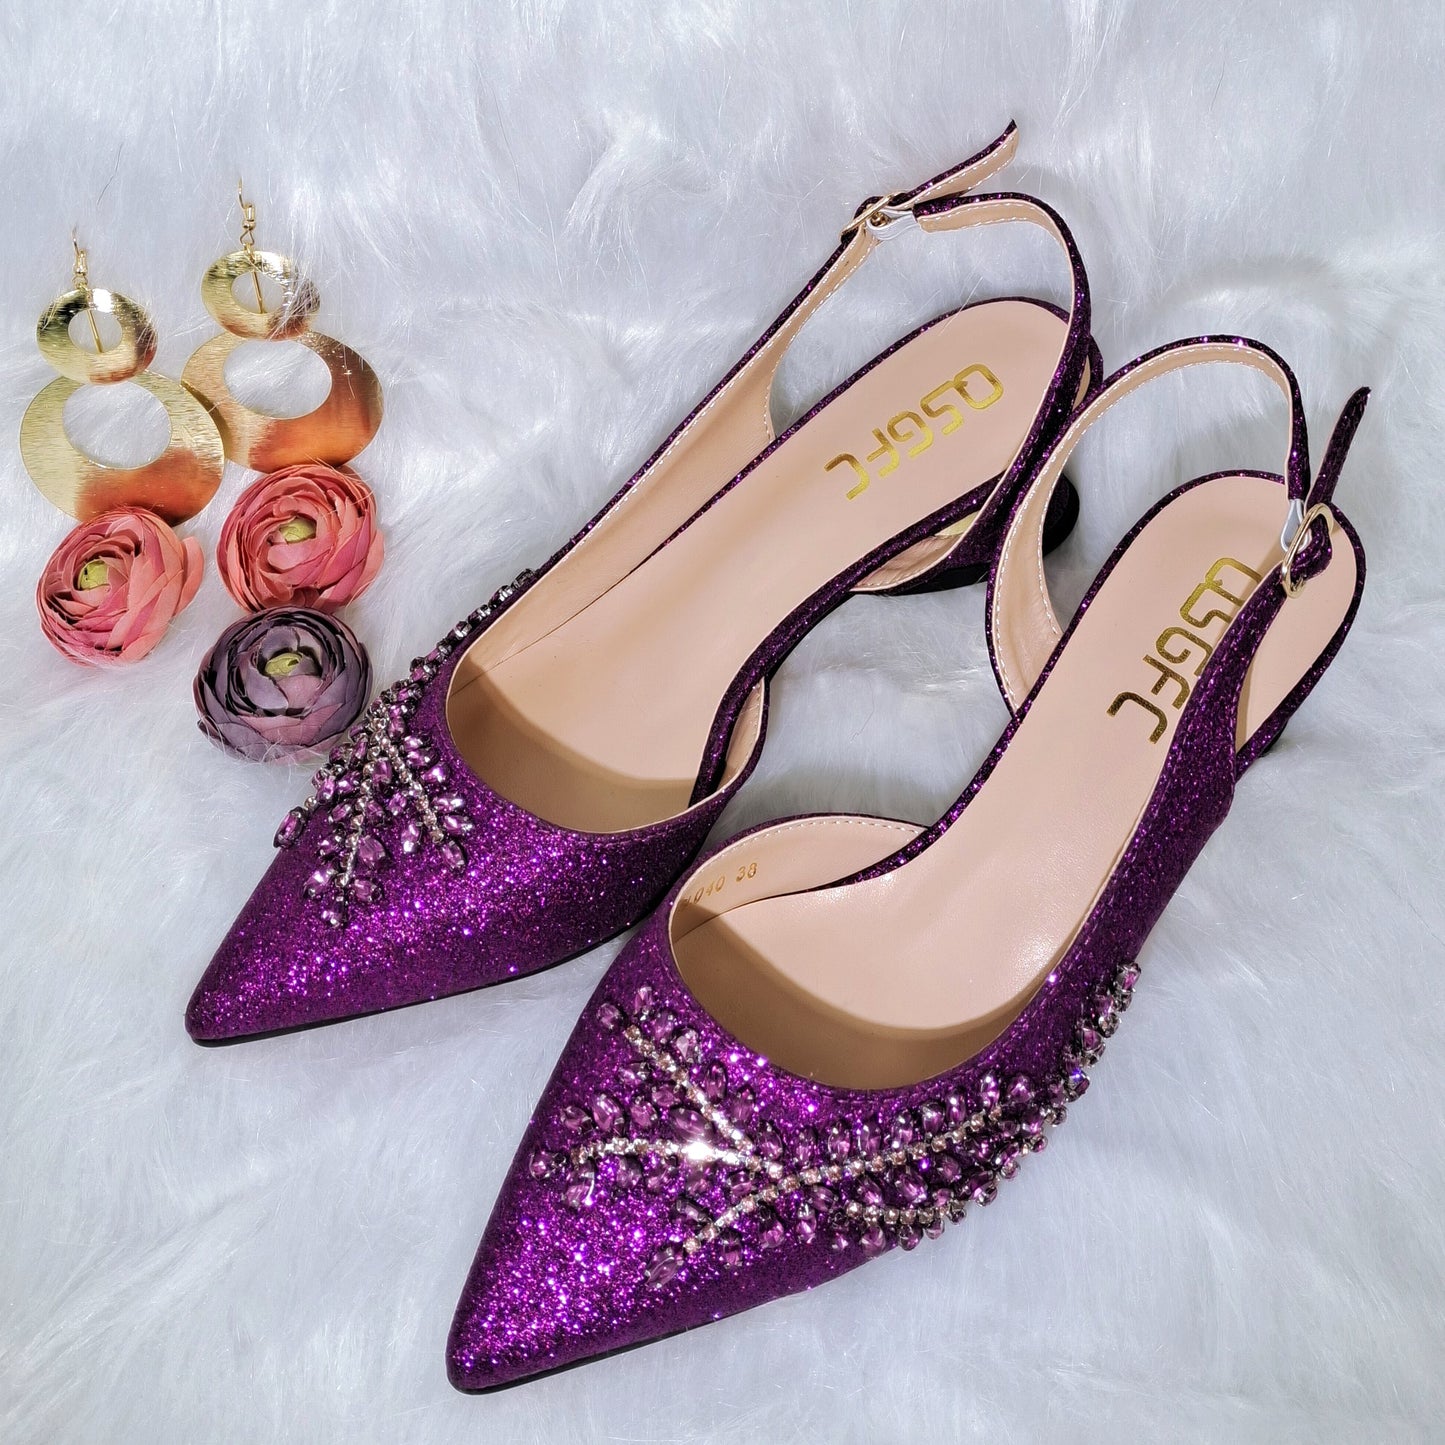 Shaped Mid-heel Design Shoes Popular Pointed Ladies Shoes And Bags African Wedding Party Shoes With Bag